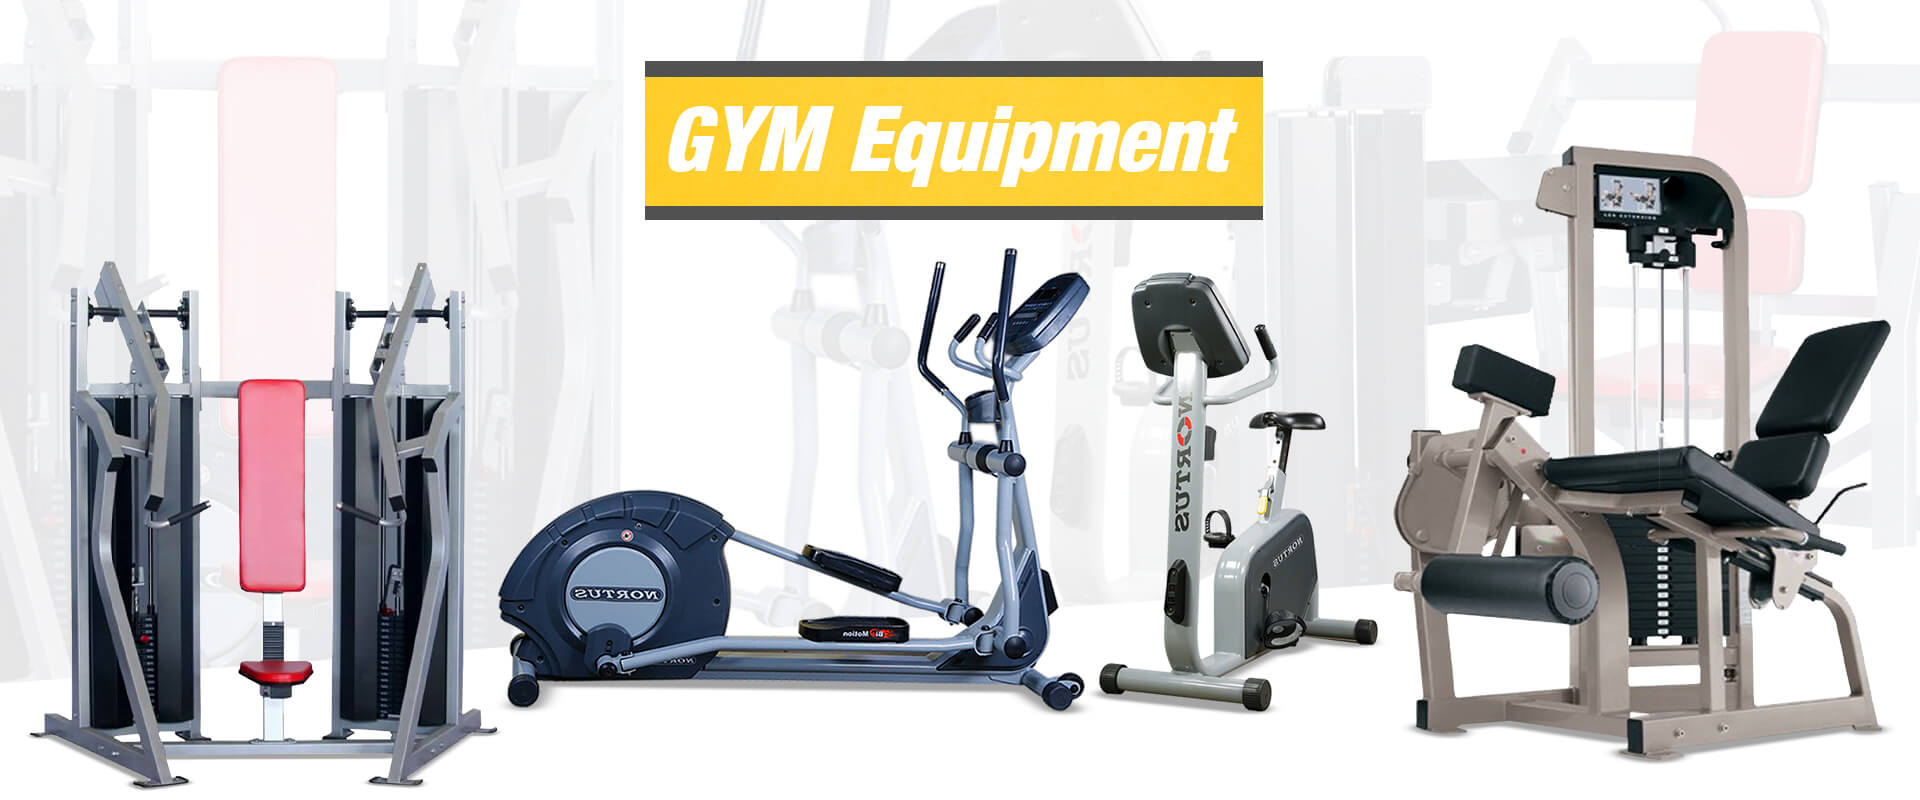 Top 5 Gym Equipment Brands In India